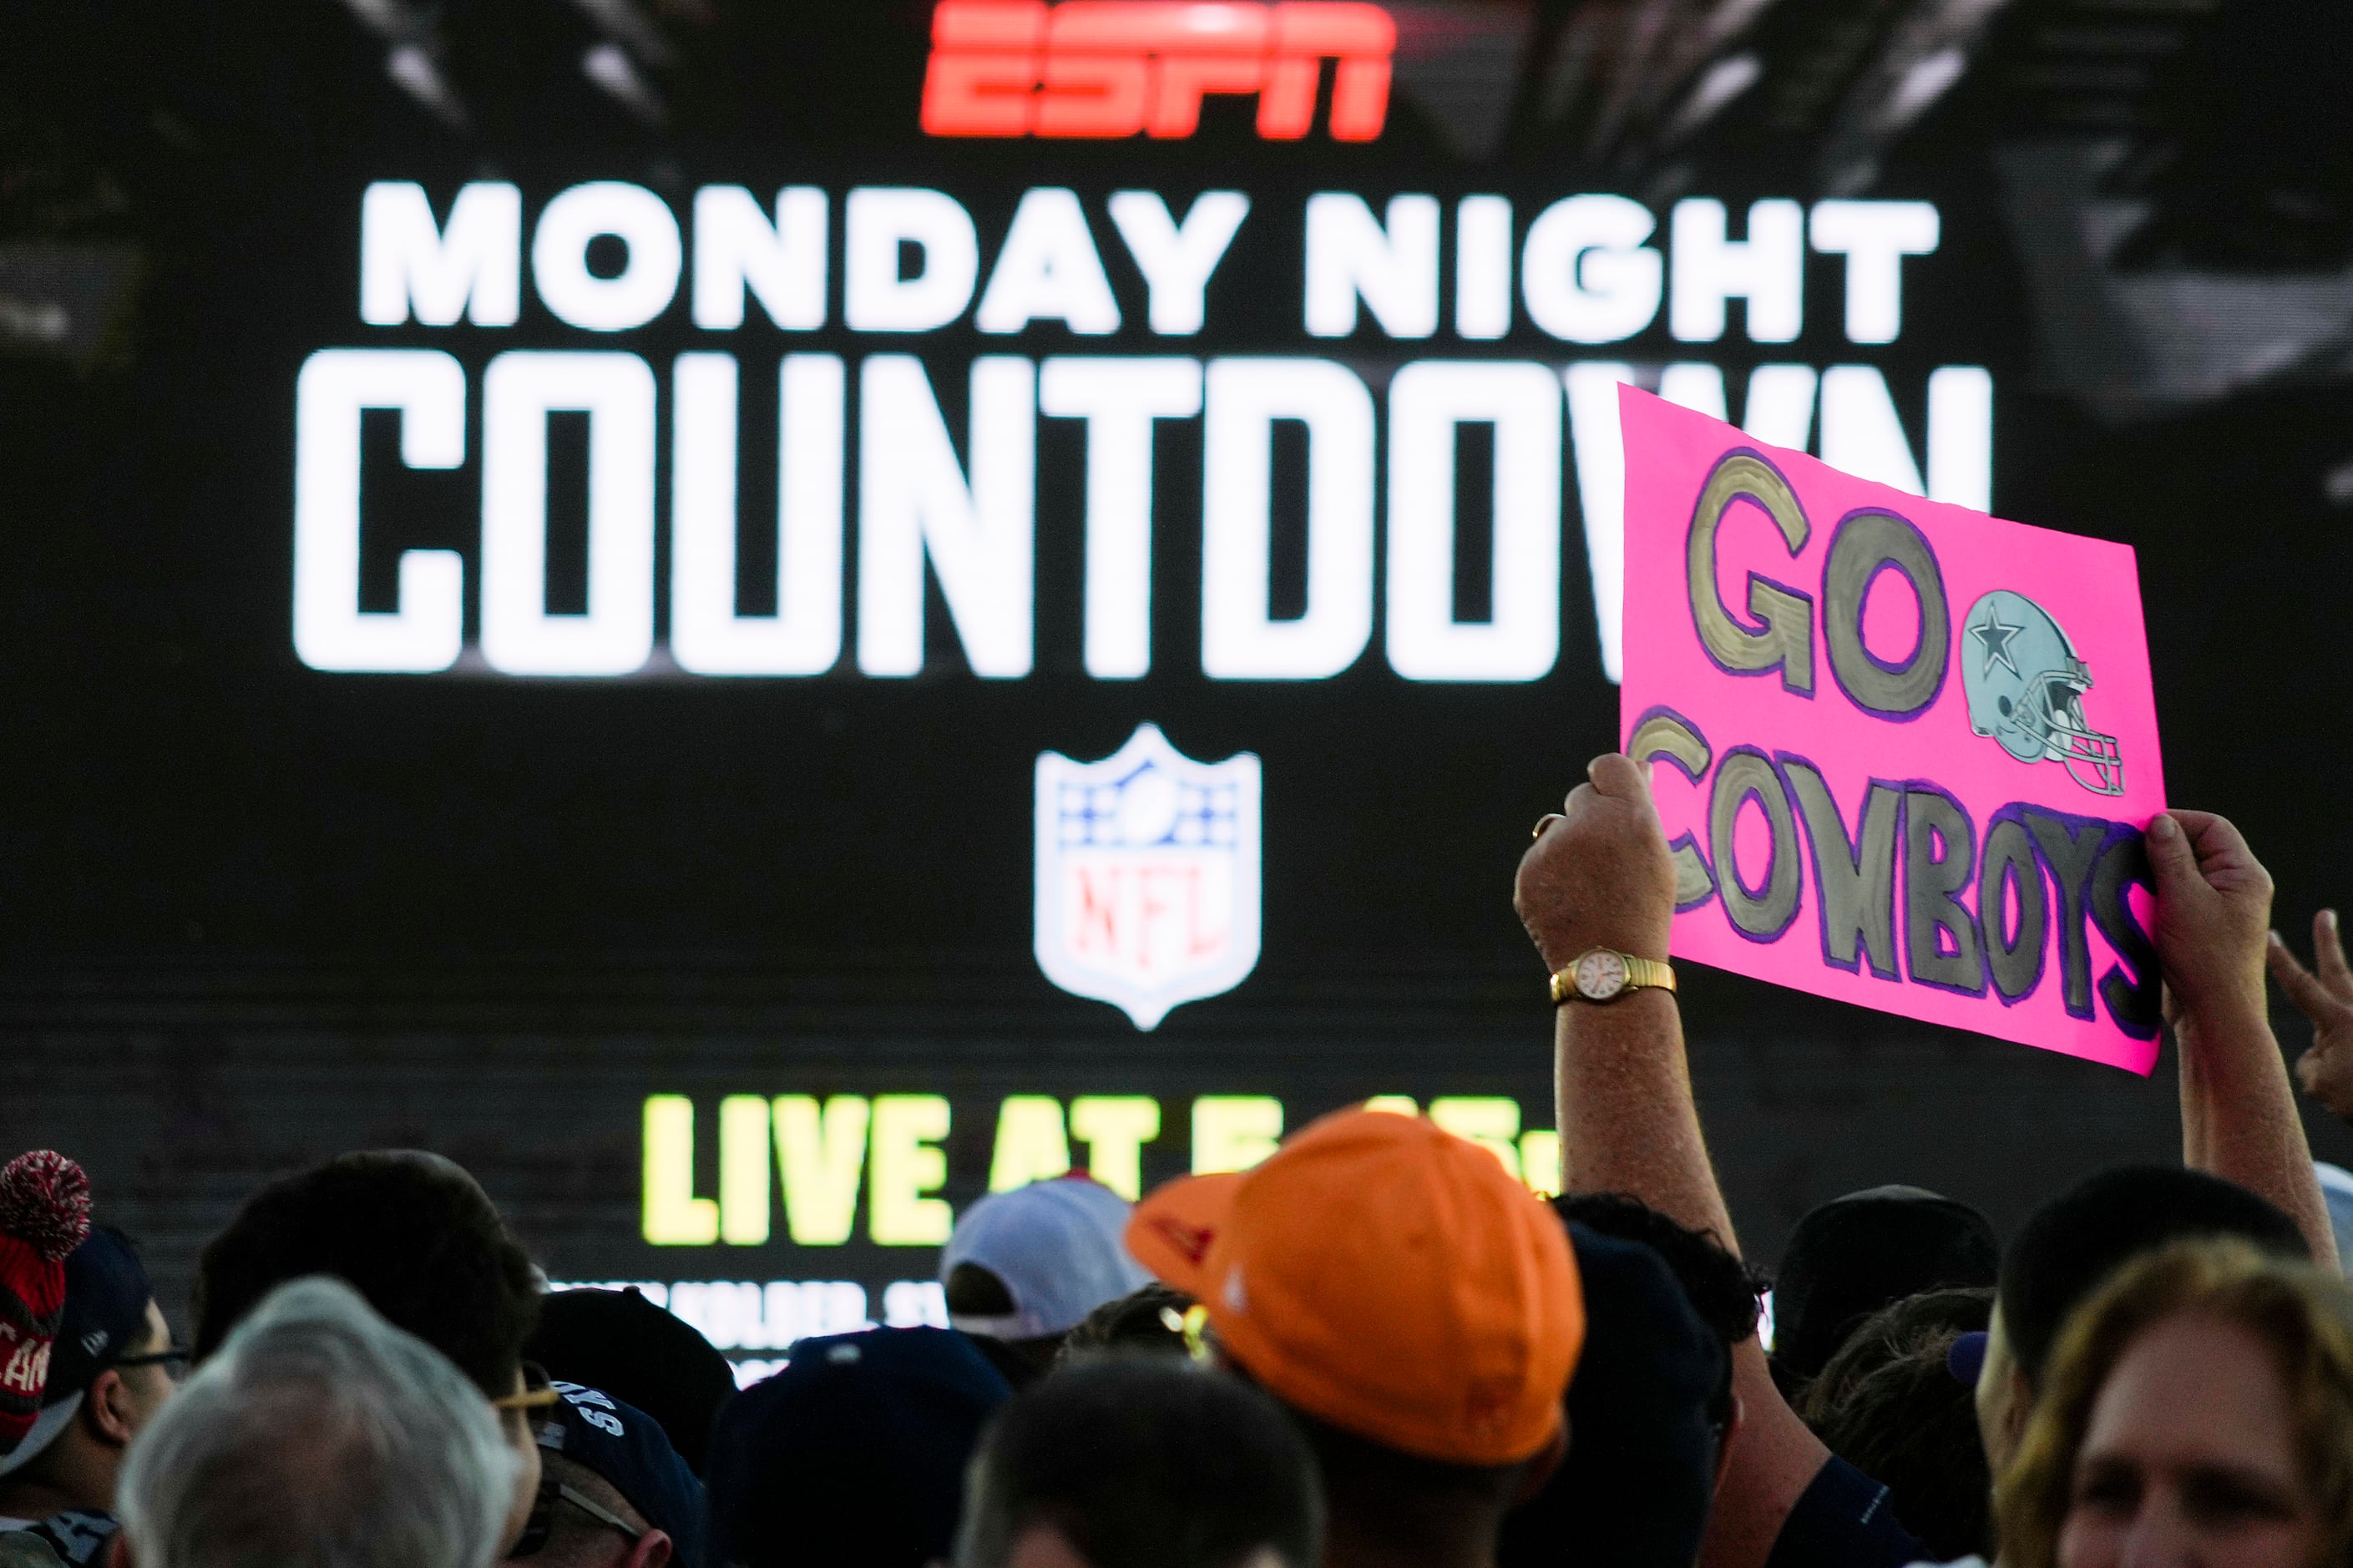 Disney, Charter resolve dispute in time for 'Monday Night Football'